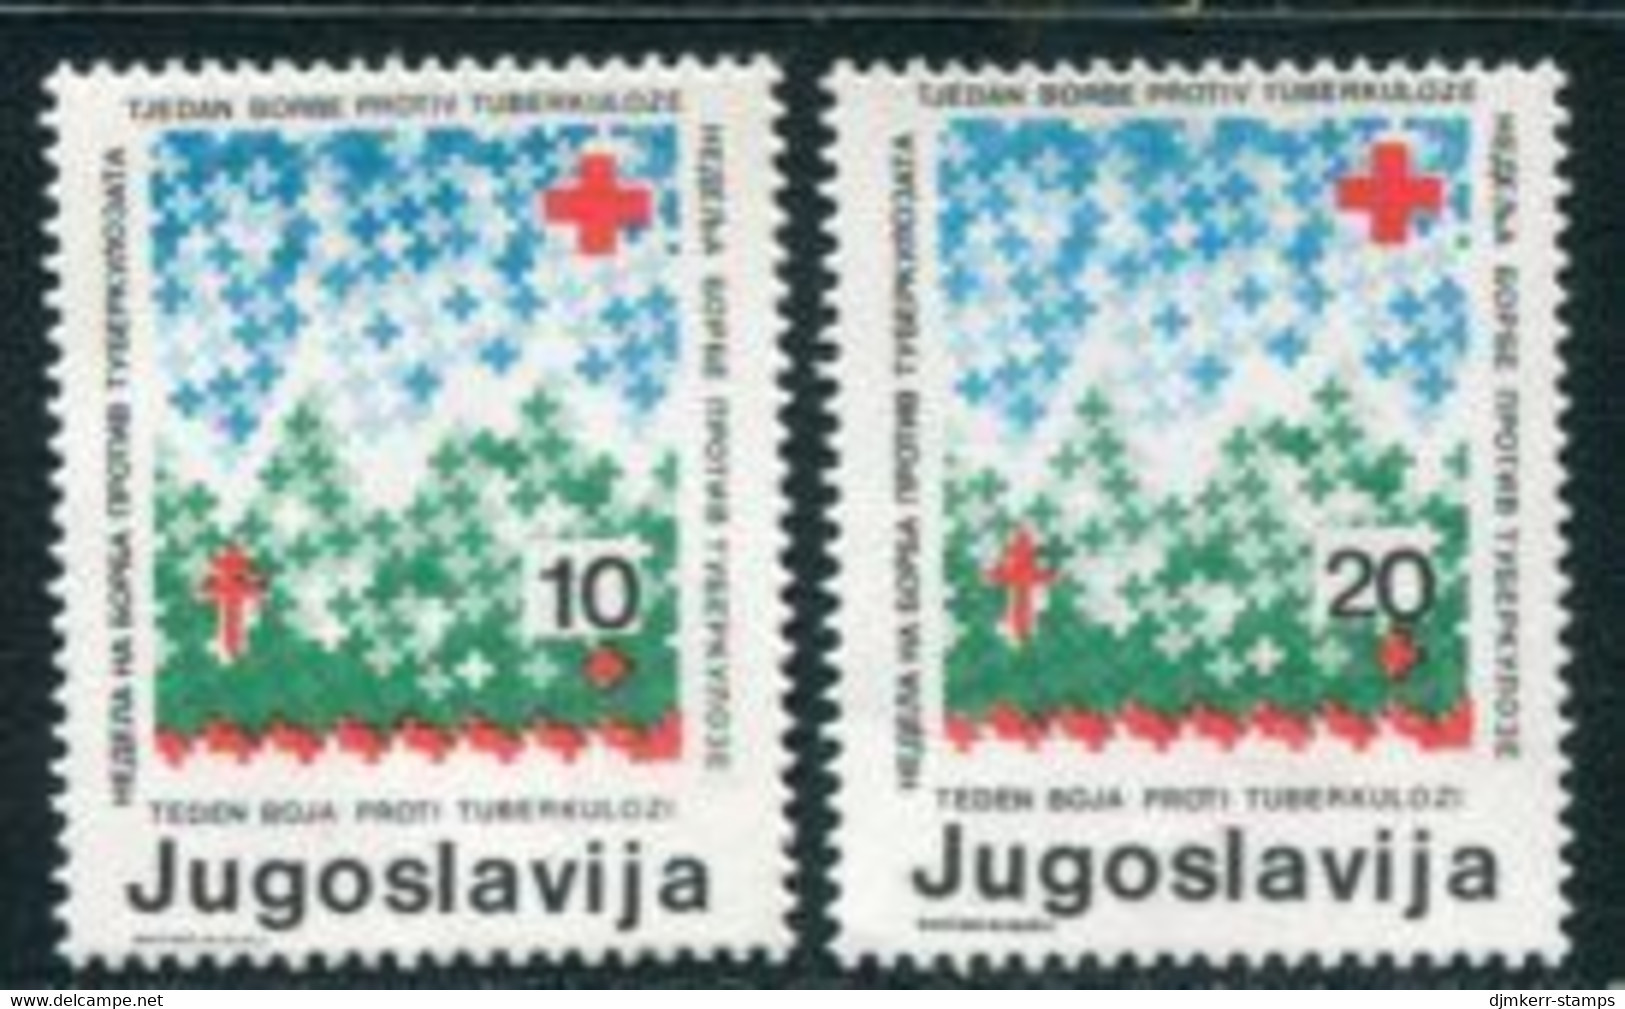 YUGOSLAVIA 1986 Red Cross Anti-Tuberculosis Tax 10, 20 D. Perforated 13¼:13½ MNH / **. Michel ZZM 119C, 122C - Unused Stamps